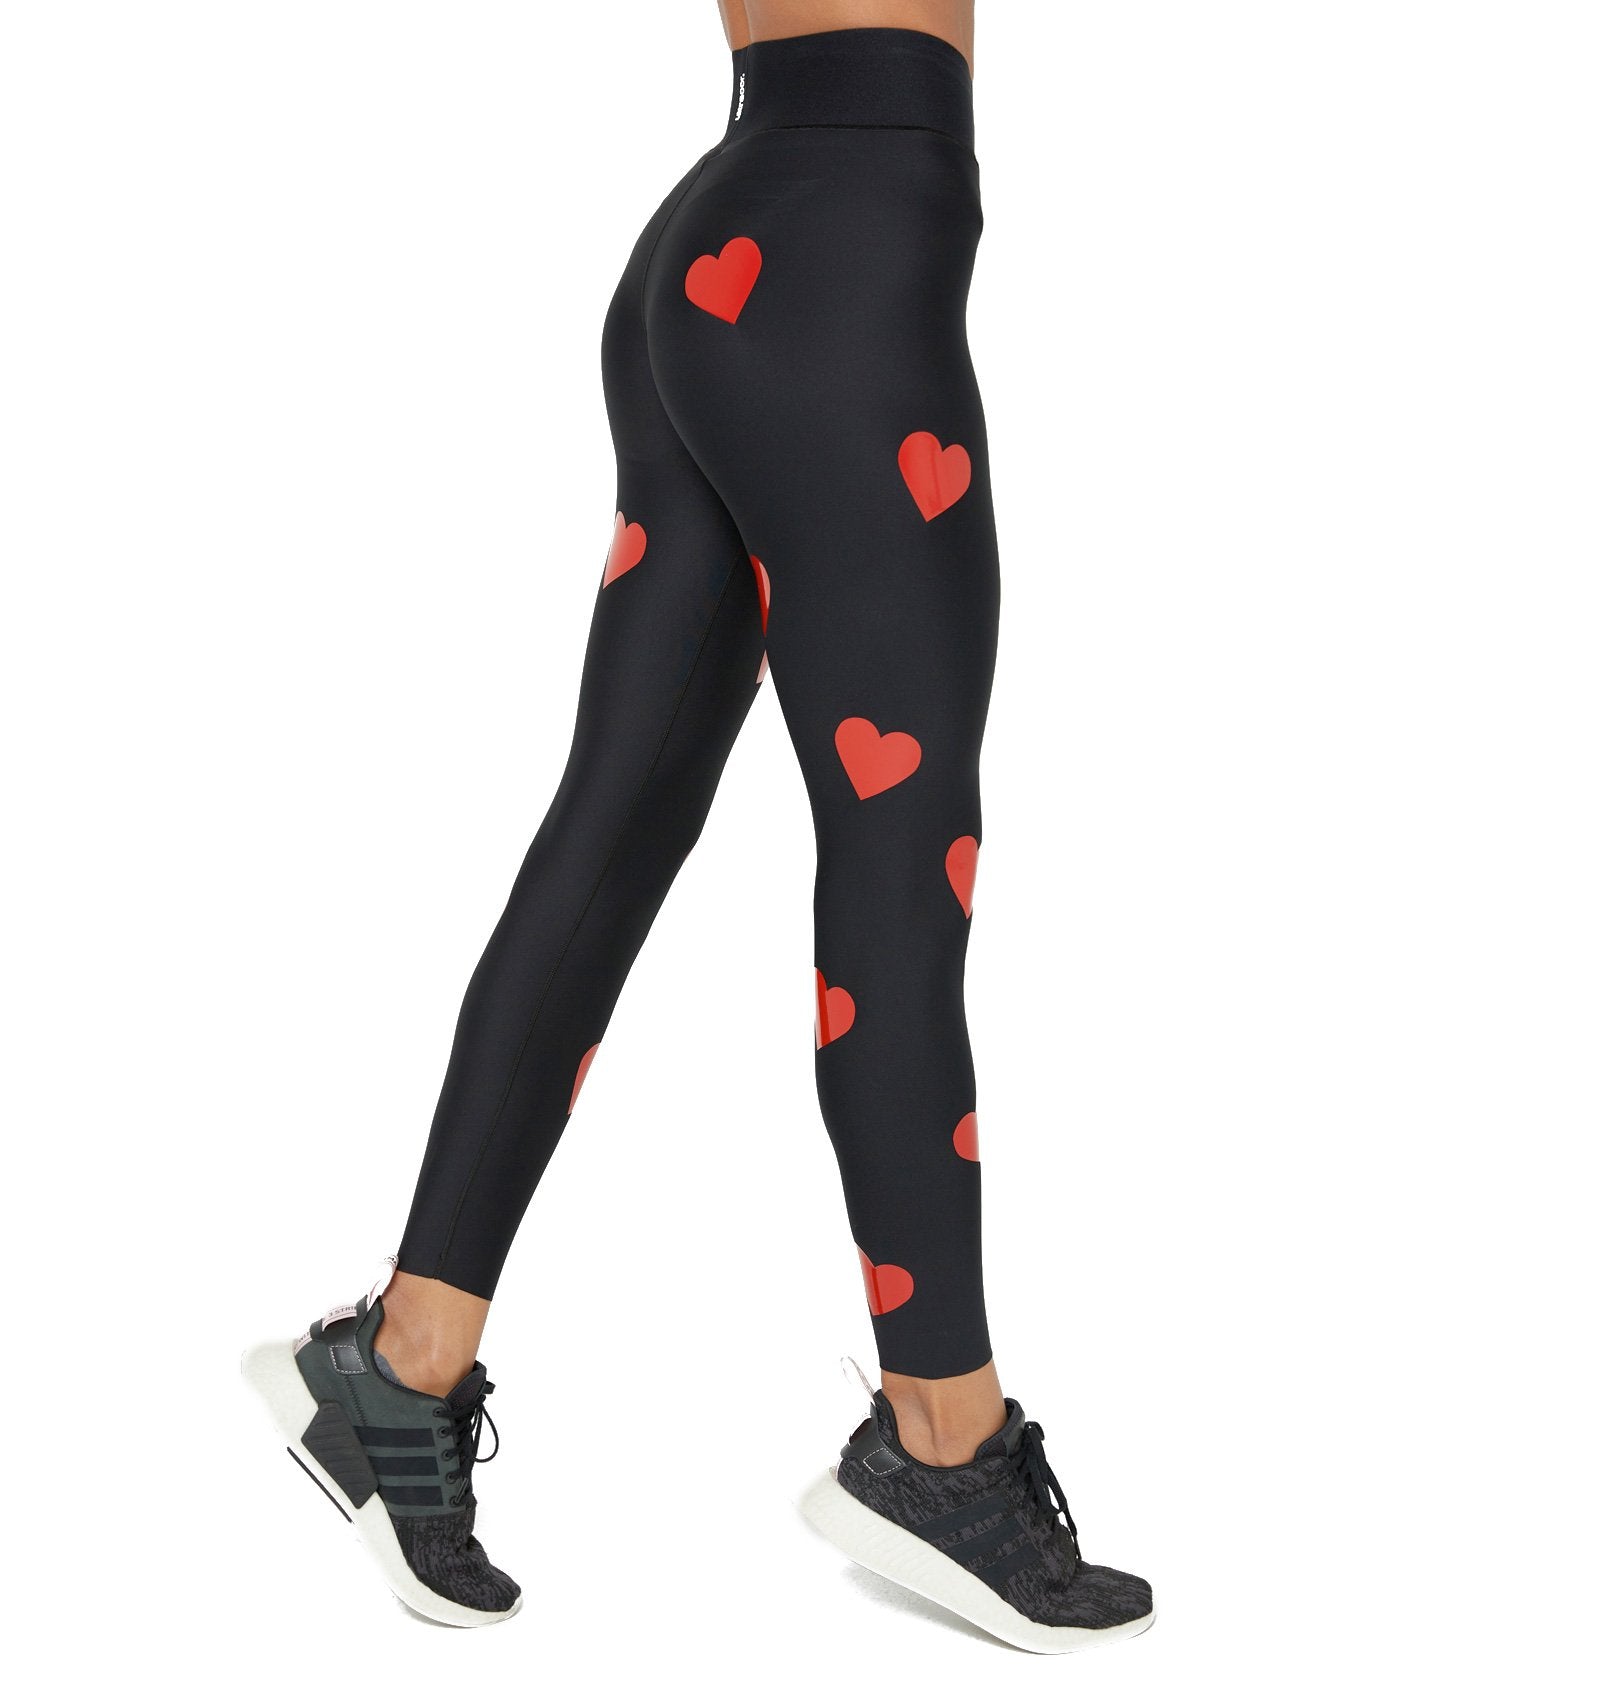 Cor For Ultracor Red Leopard Leggings Nwt Small India